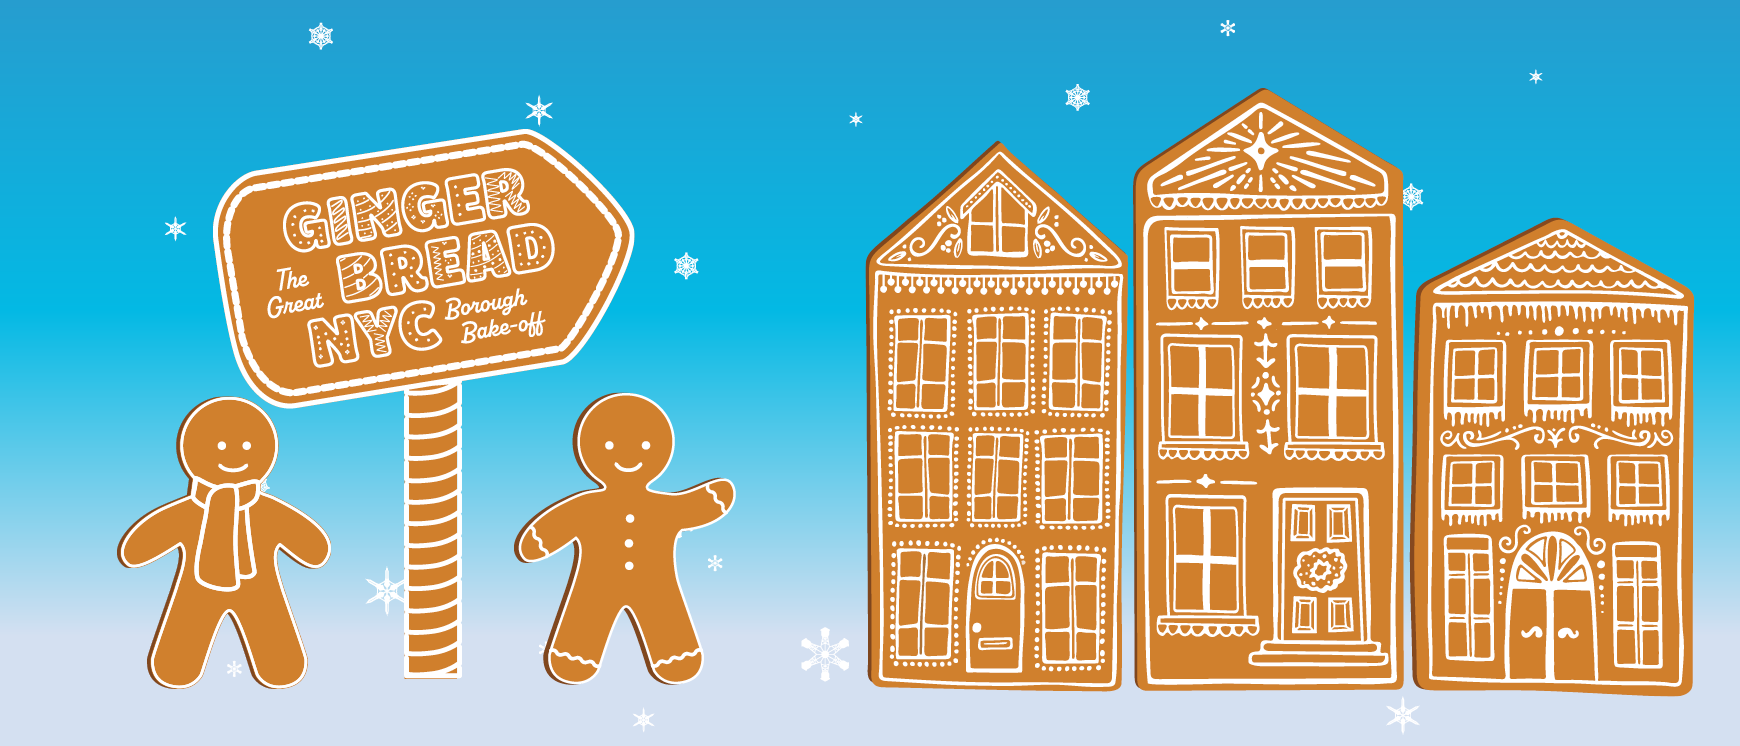 Graphic of two gingerbread people standing next to a sign with the exhibition title, pointing to three gingerbread houses